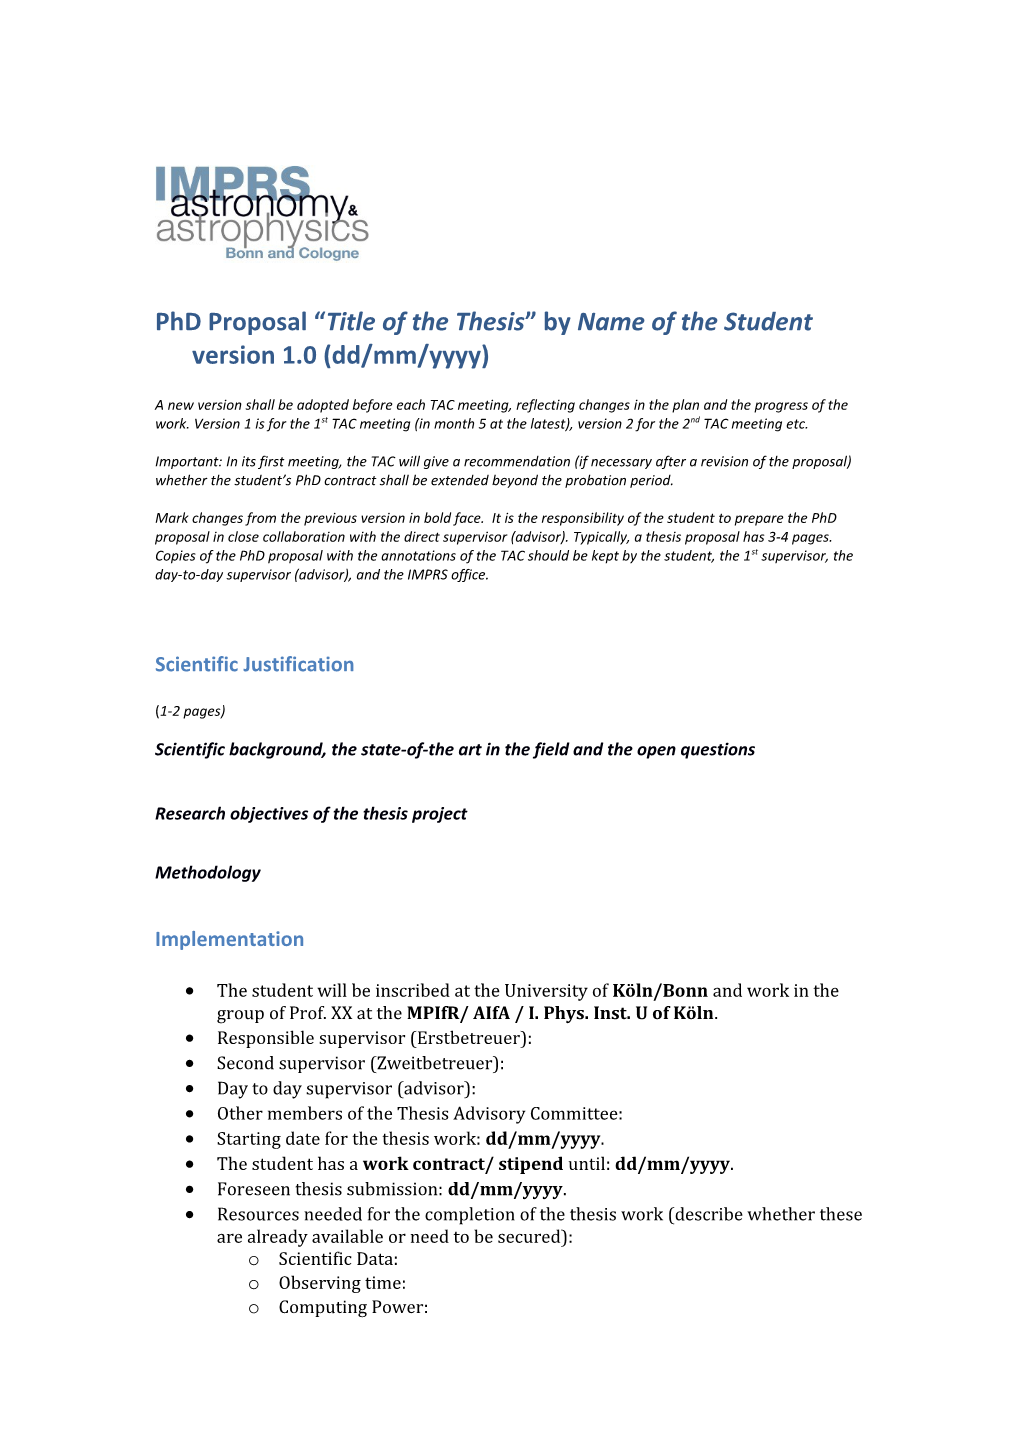 Phd Proposal Title of the Thesis by Name of the Student Version 1.0 (Dd/Mm/Yyyy)